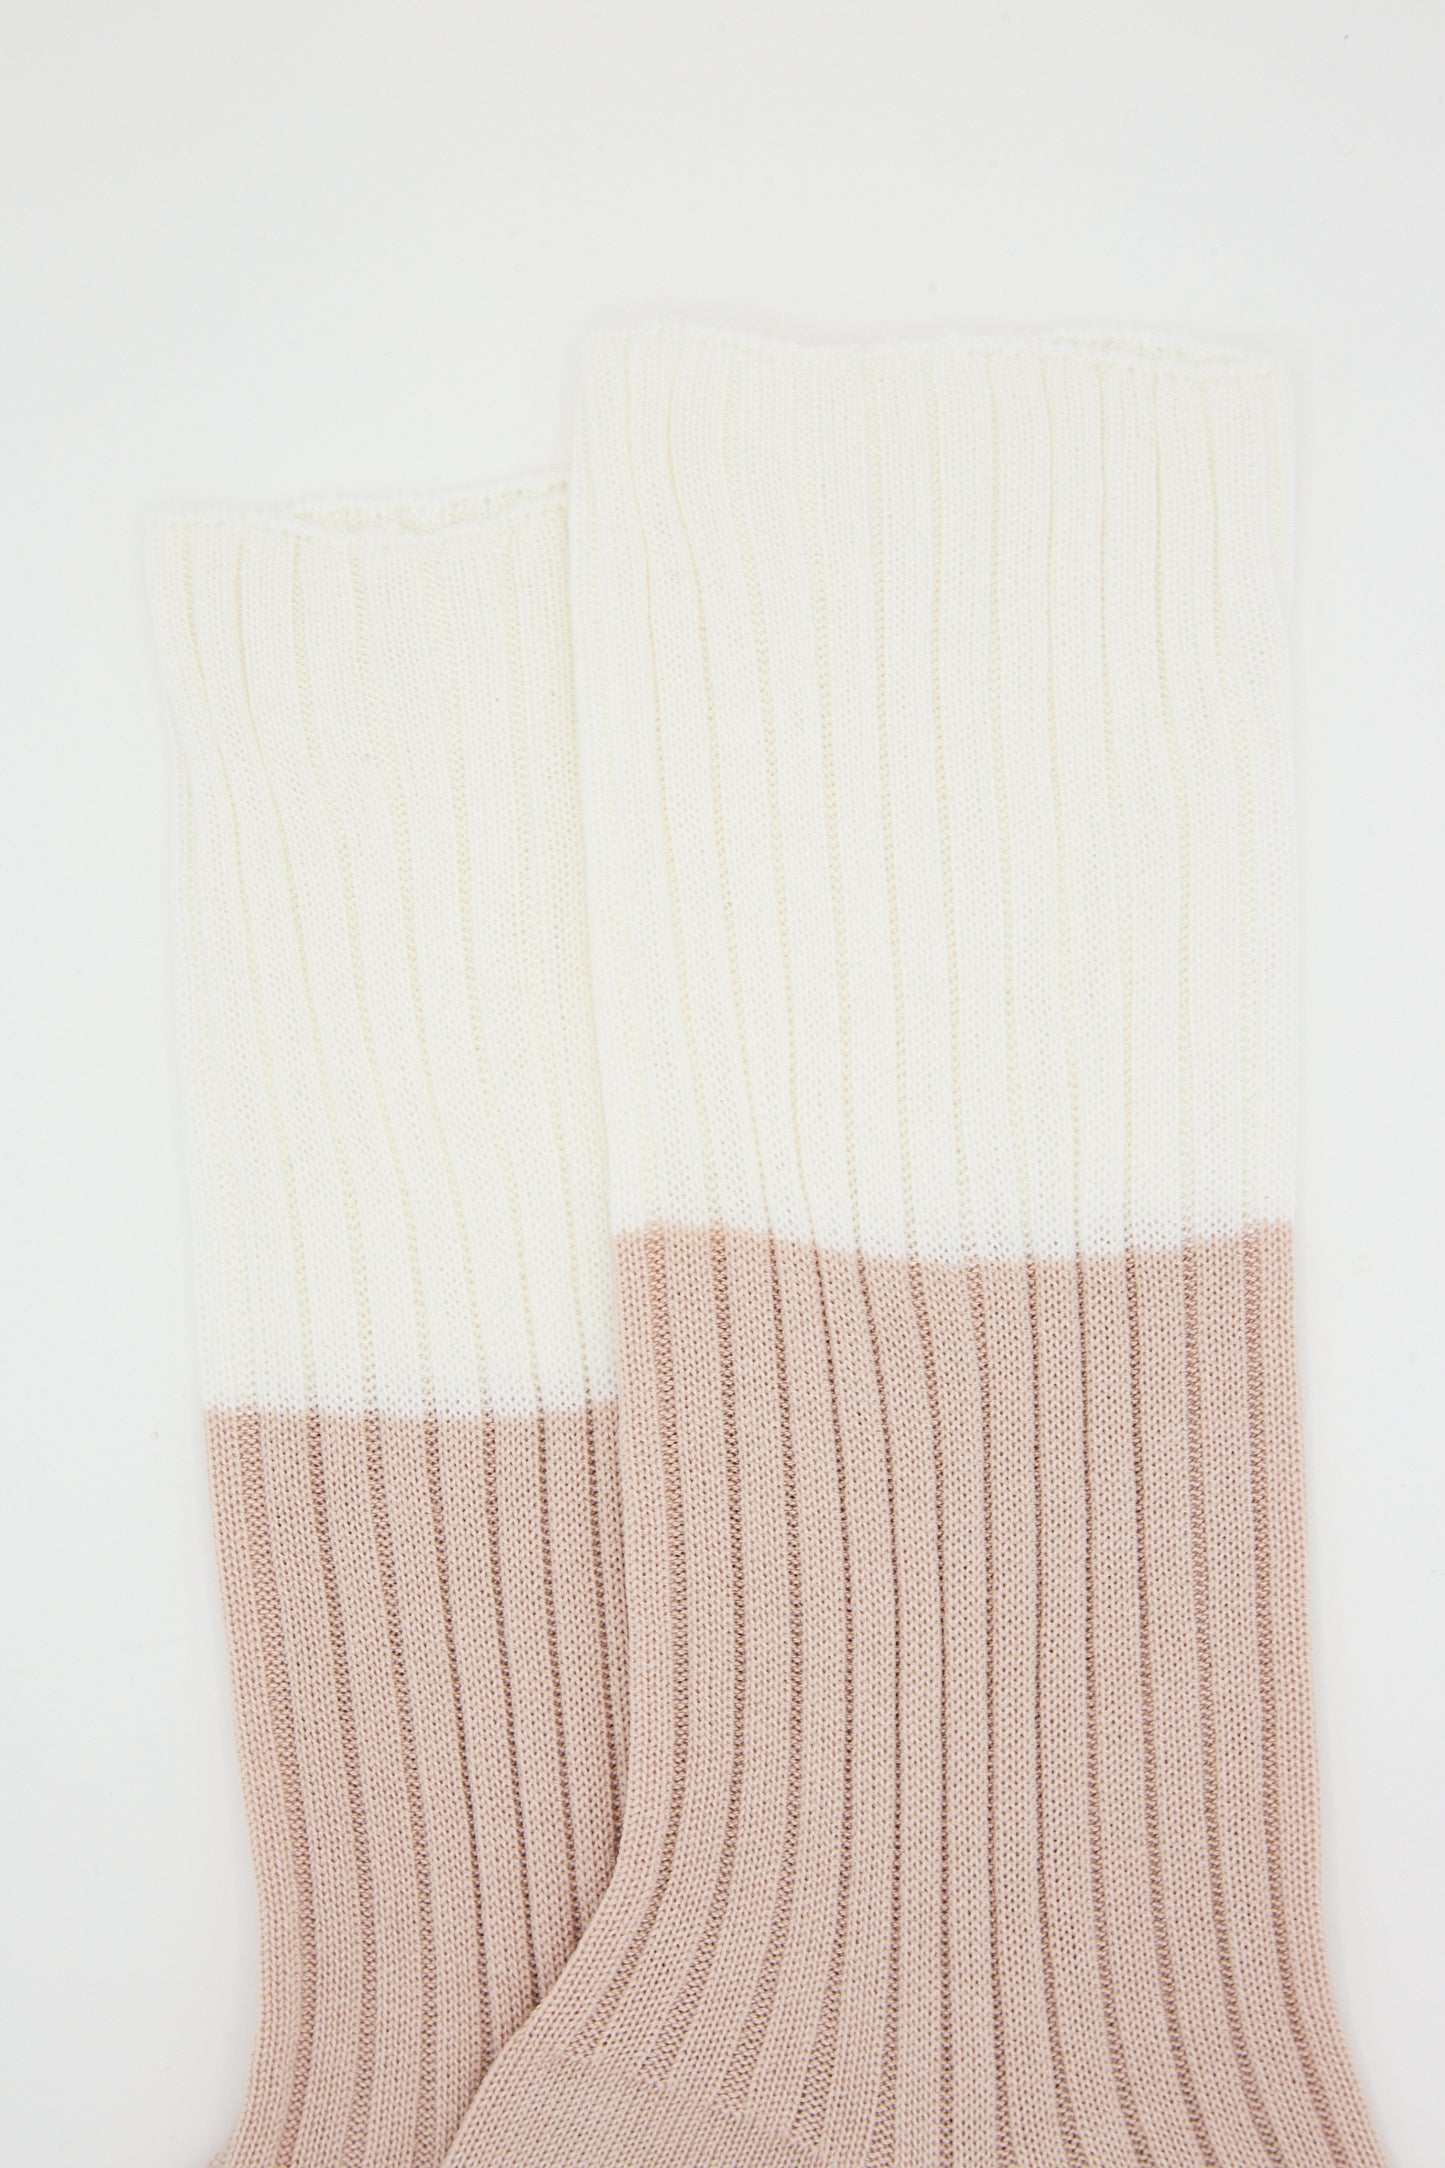 A pair of Ribbed Cotton Four Crew Sock in Ivory and Nude by Sofie D'Hoore against a white background.